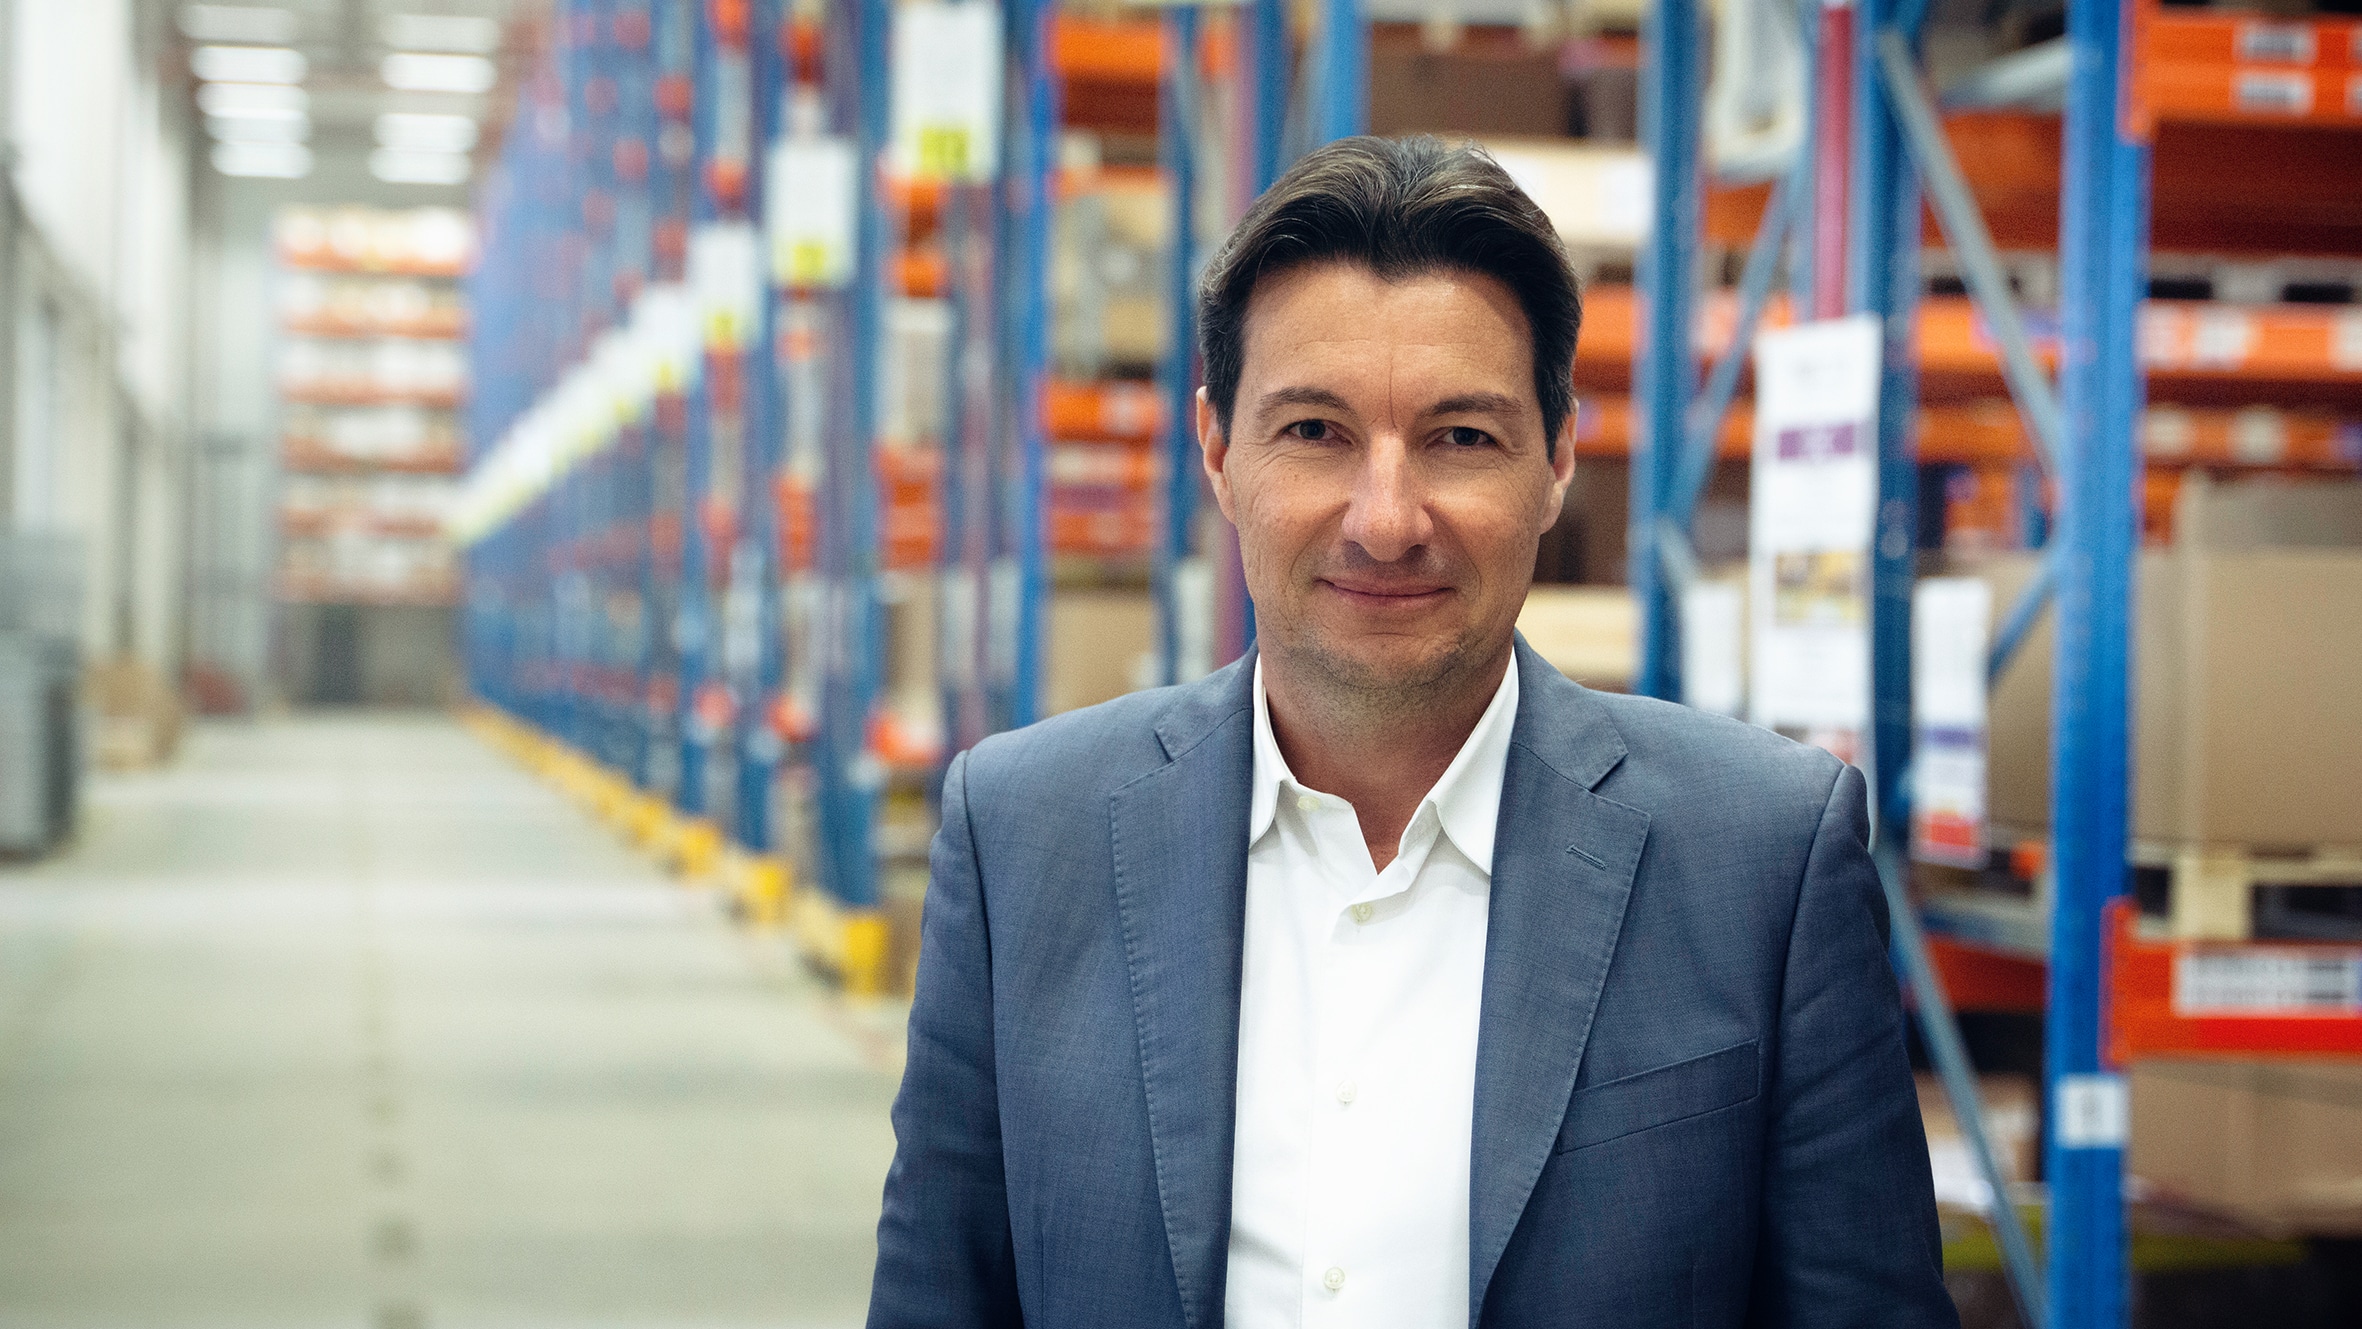 interview – as well as profile information – with Clément de Valon, Executive Vice President Independent Aftermarket at TMD Friction